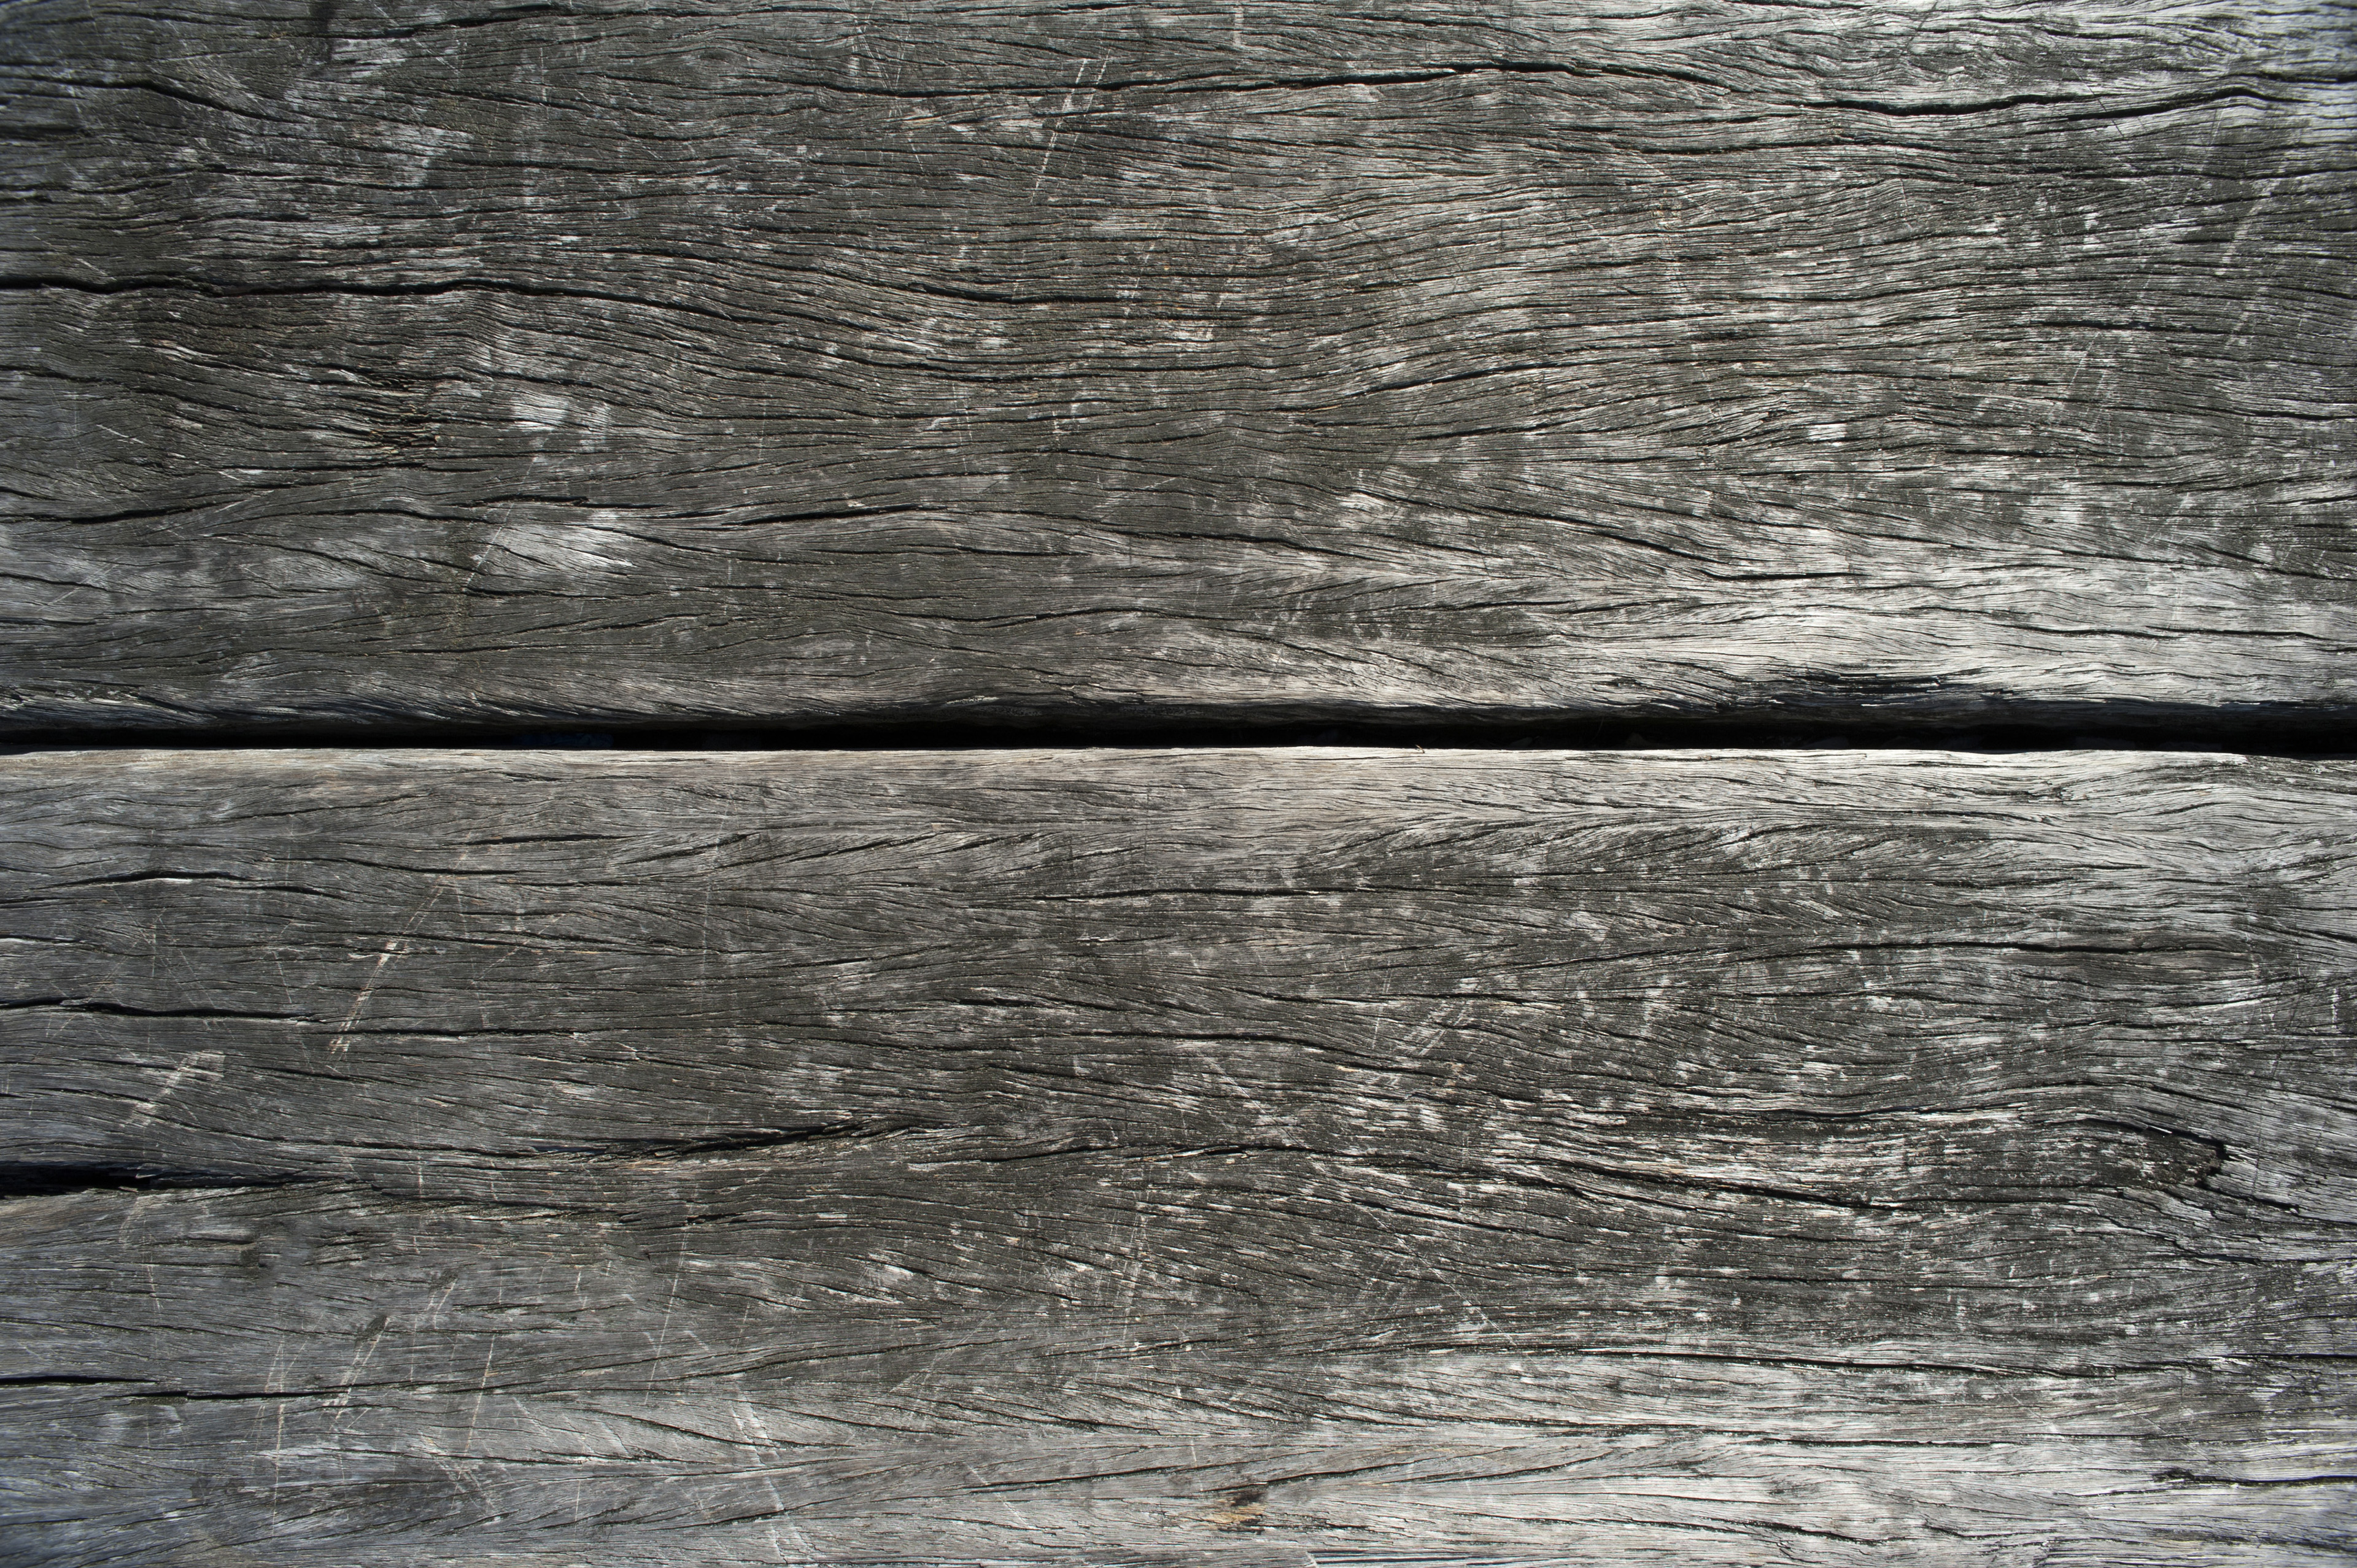 Wooden board texture photo